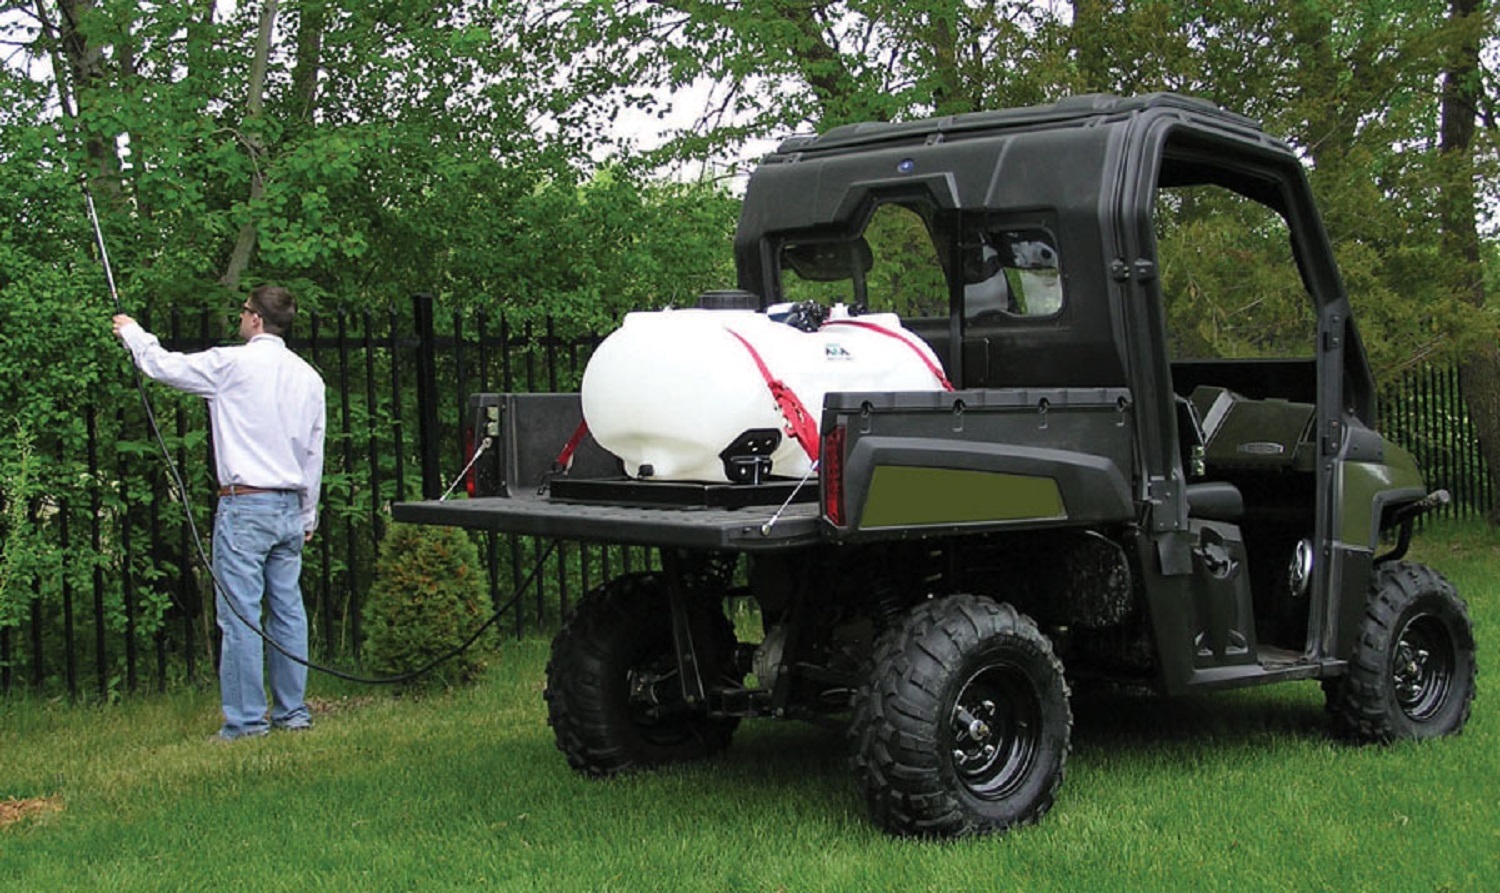 Commercial 60 Gallon Skid Sprayer with 3 GPM Shurflo Pump - $485.90